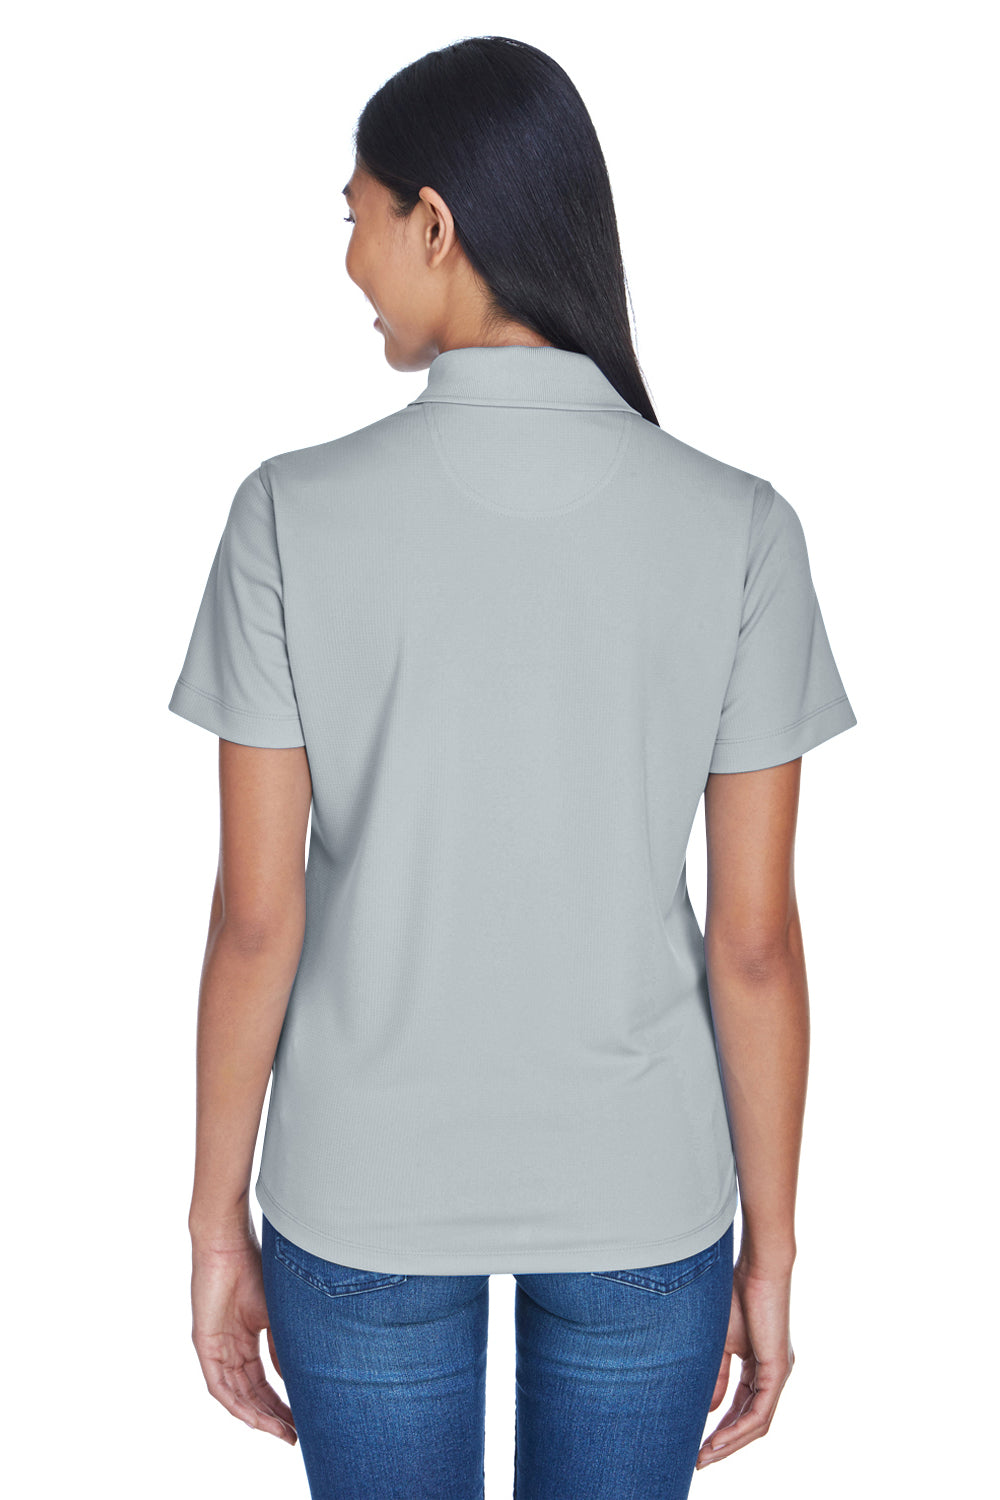 UltraClub 8445L Womens Cool & Dry Performance Moisture Wicking Short Sleeve Polo Shirt Silver Grey Back